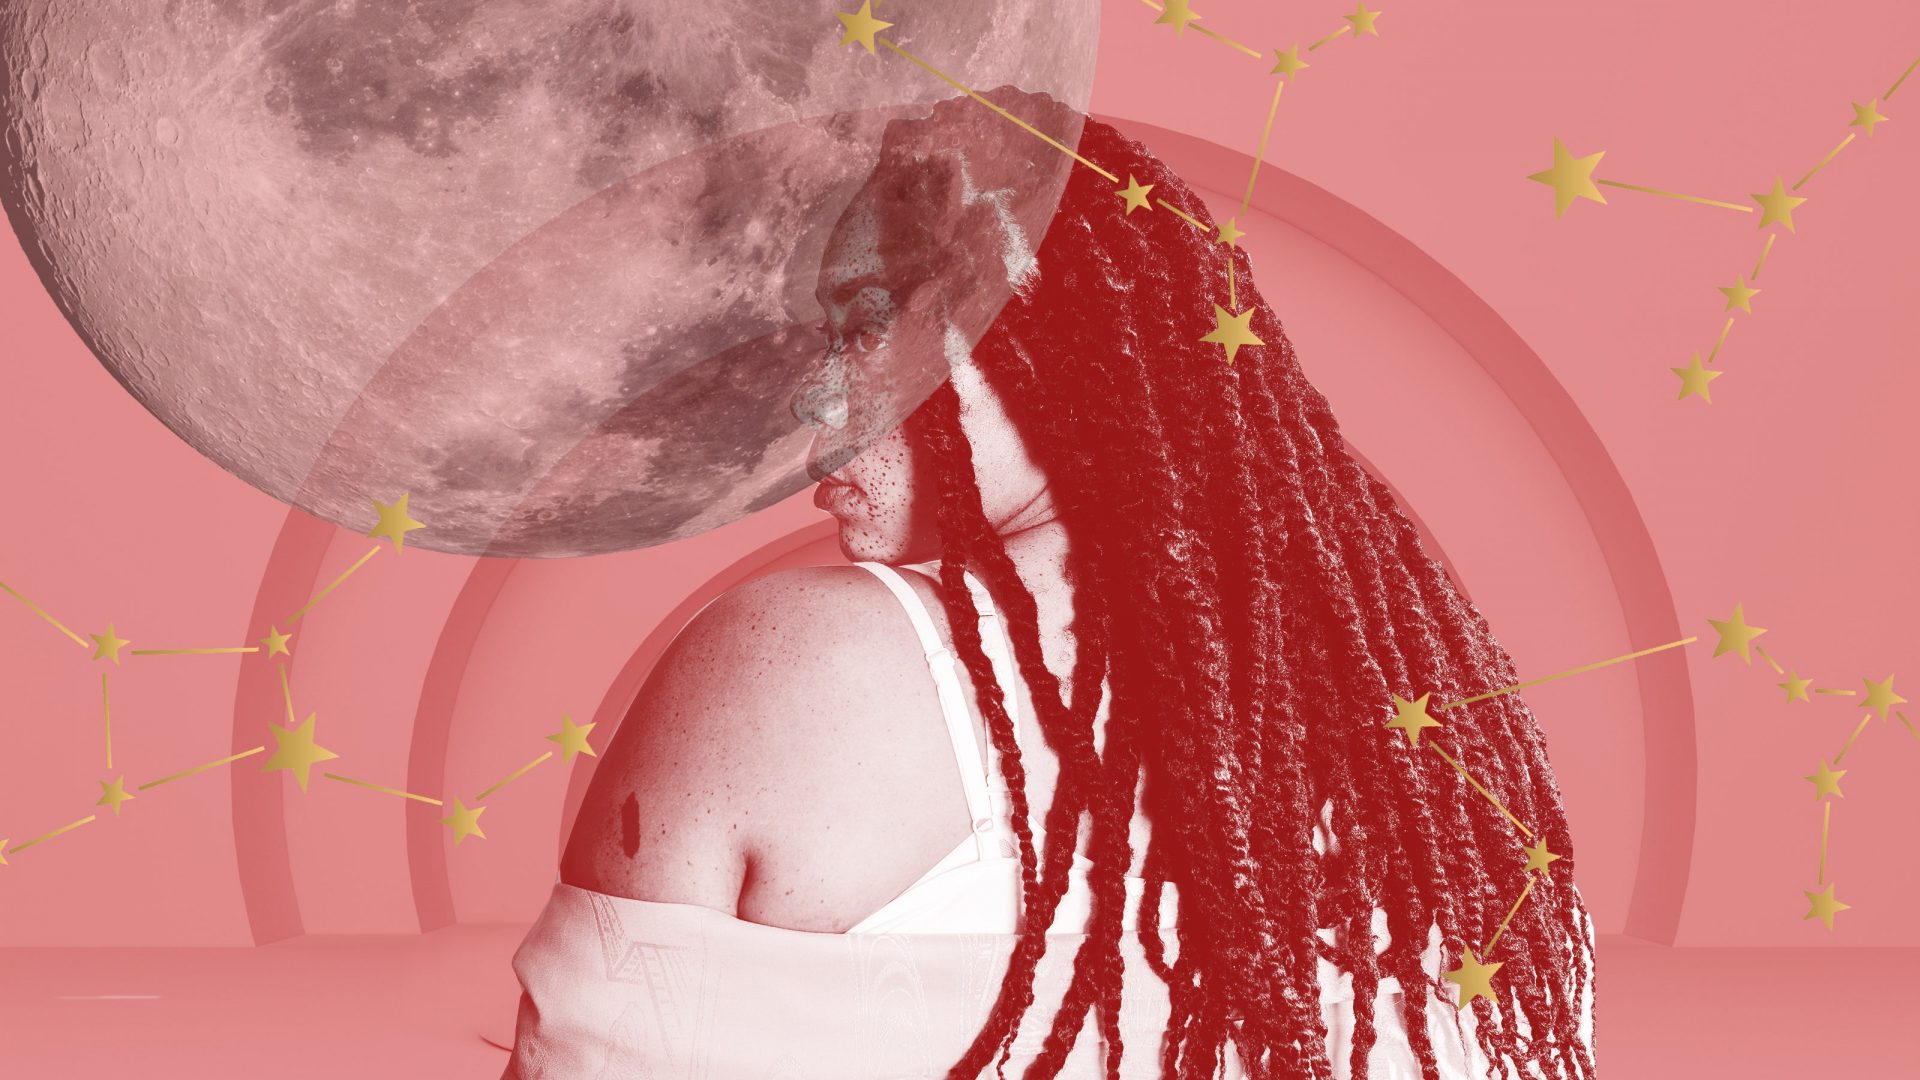 Weekly Horoscope for the Week of July 27, 2020